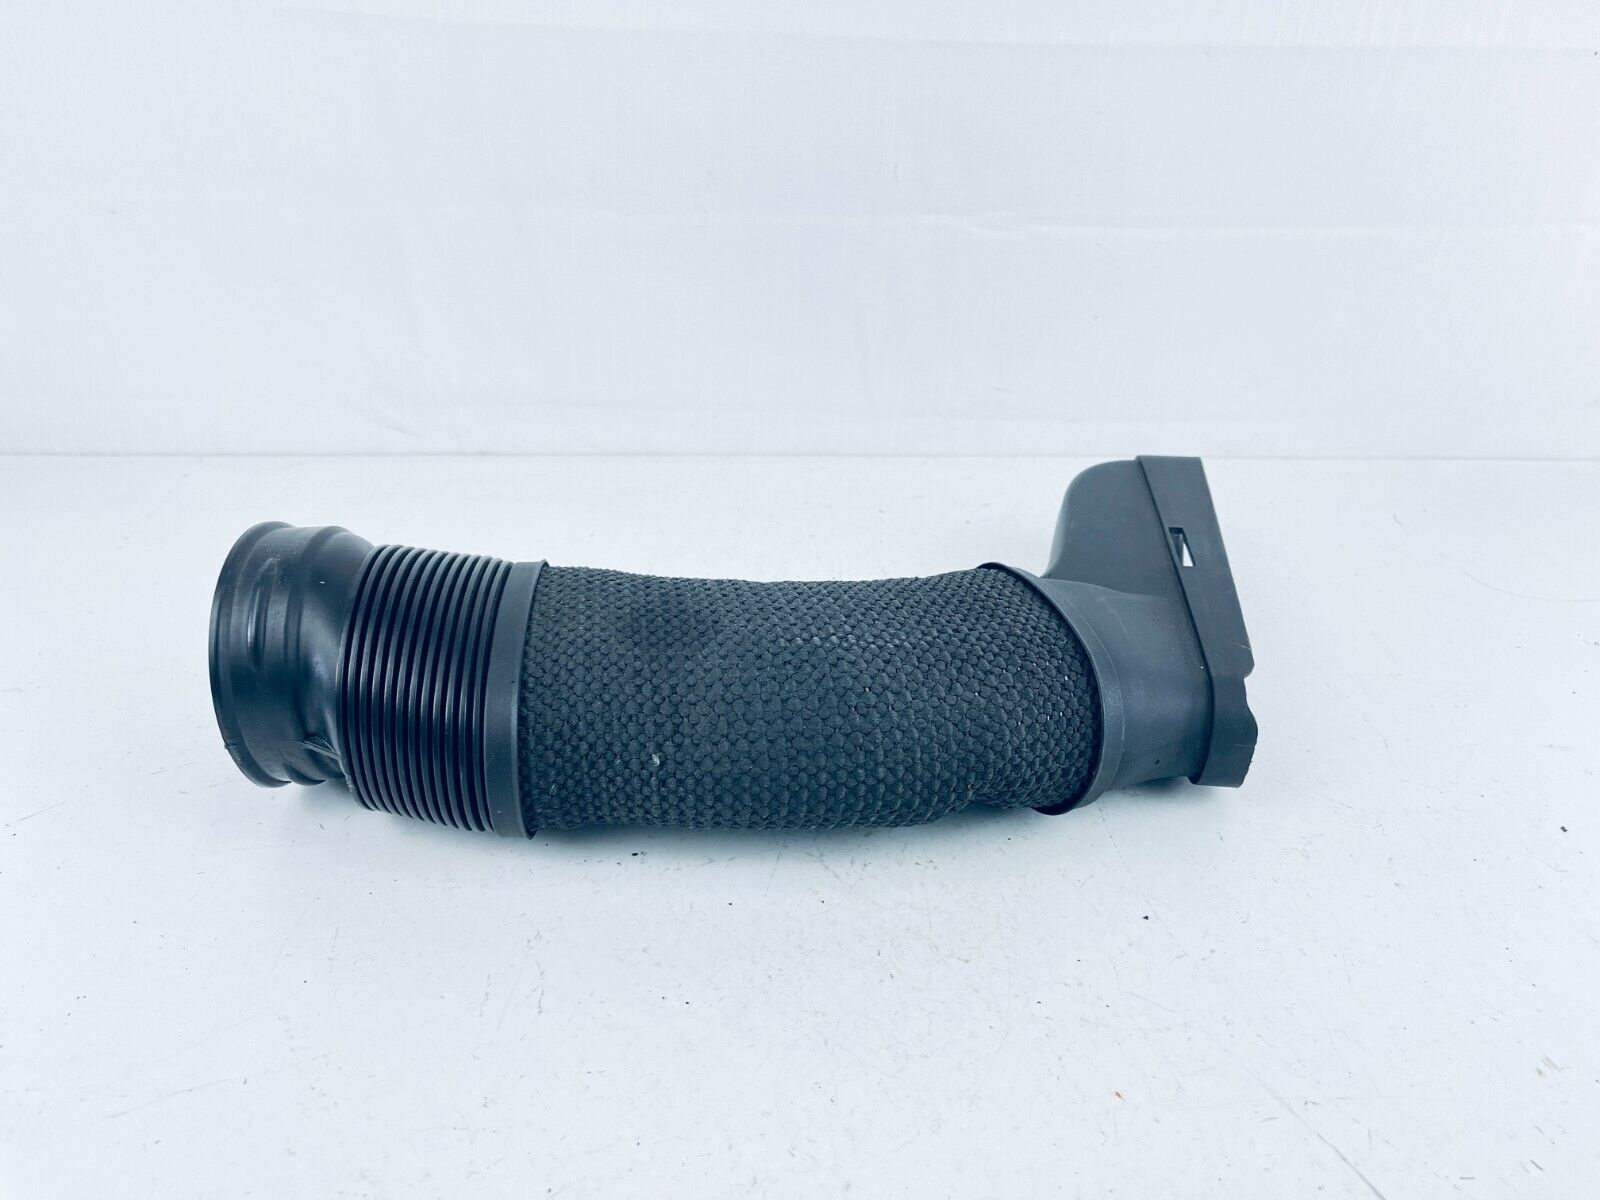 08-12 Mercedes W204 C300 E350 Air Intake Duct Pipe Hose Right Side OEM